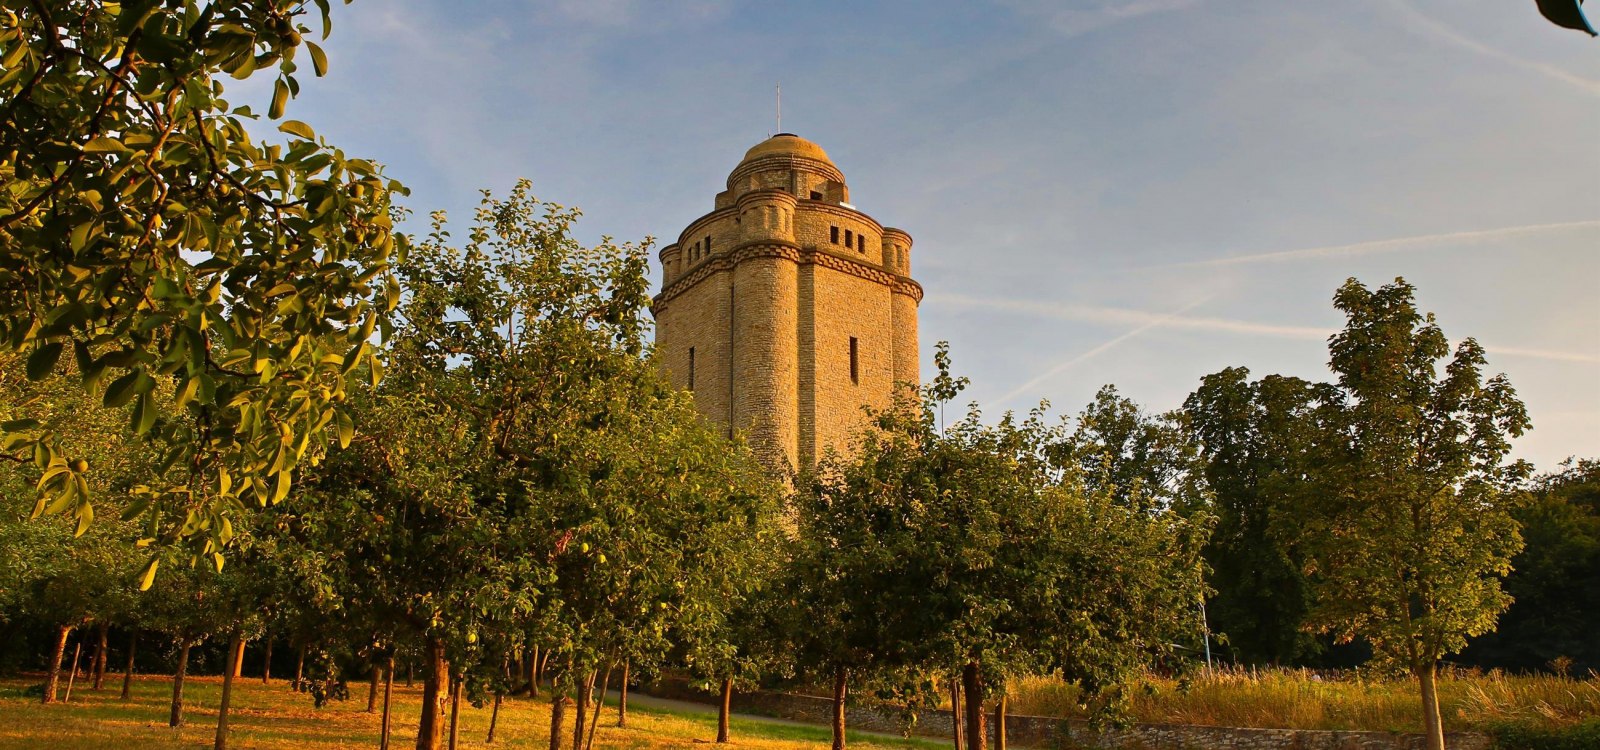 Bismarck tower with fruit trees